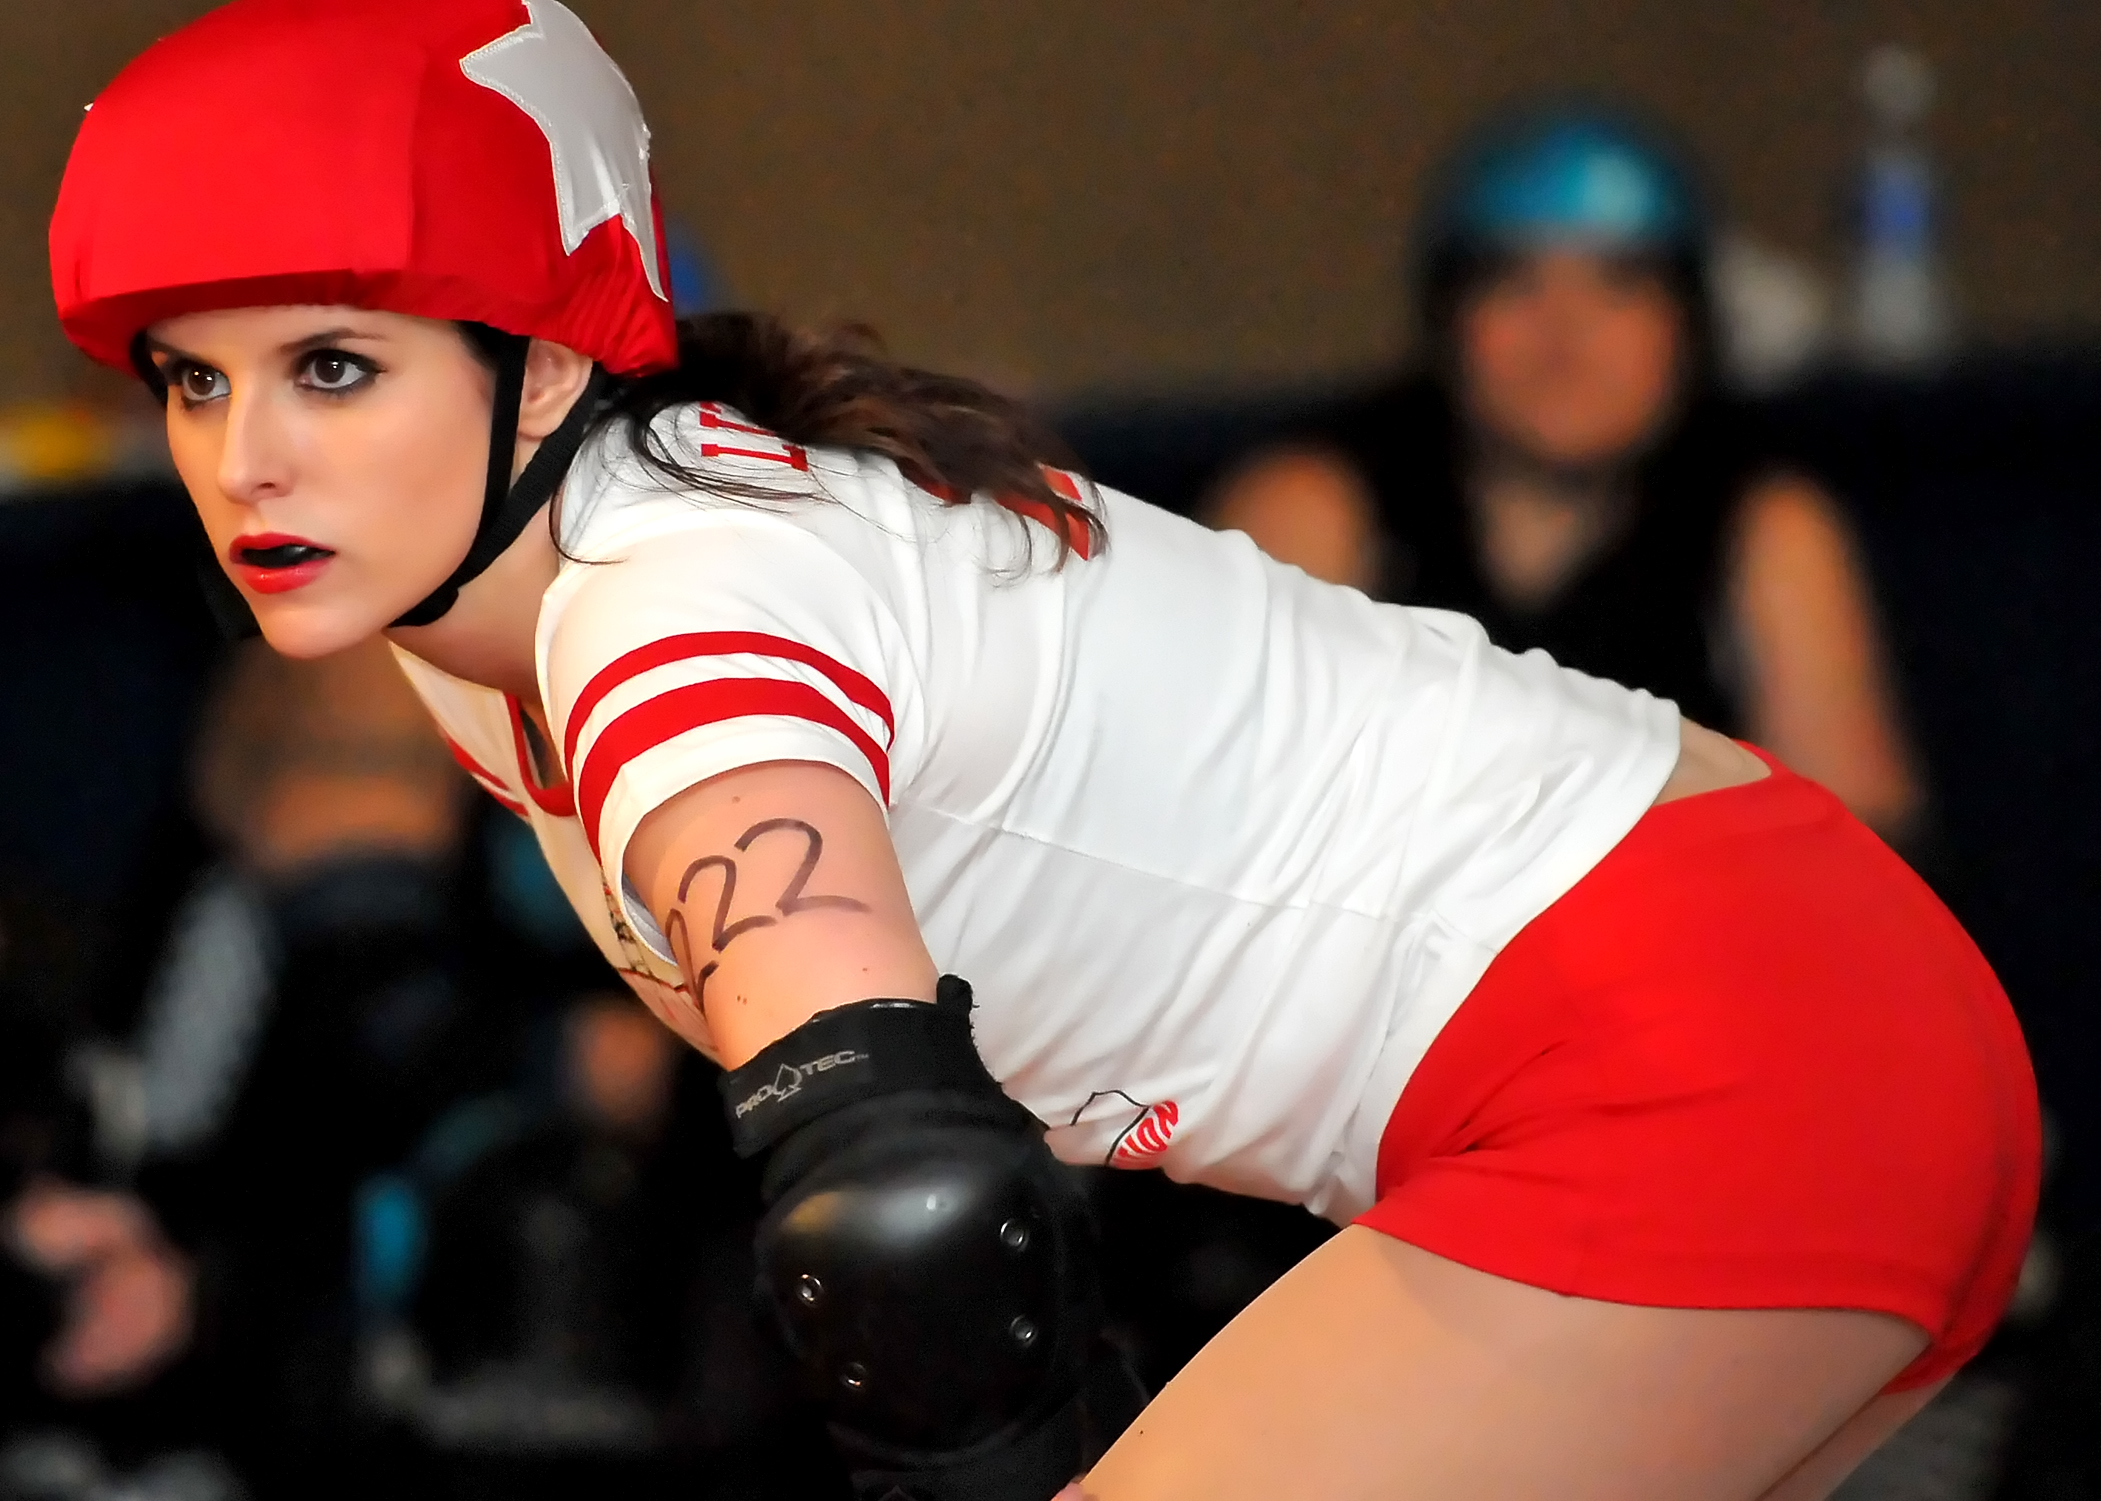 Watch the Sac City Rollers